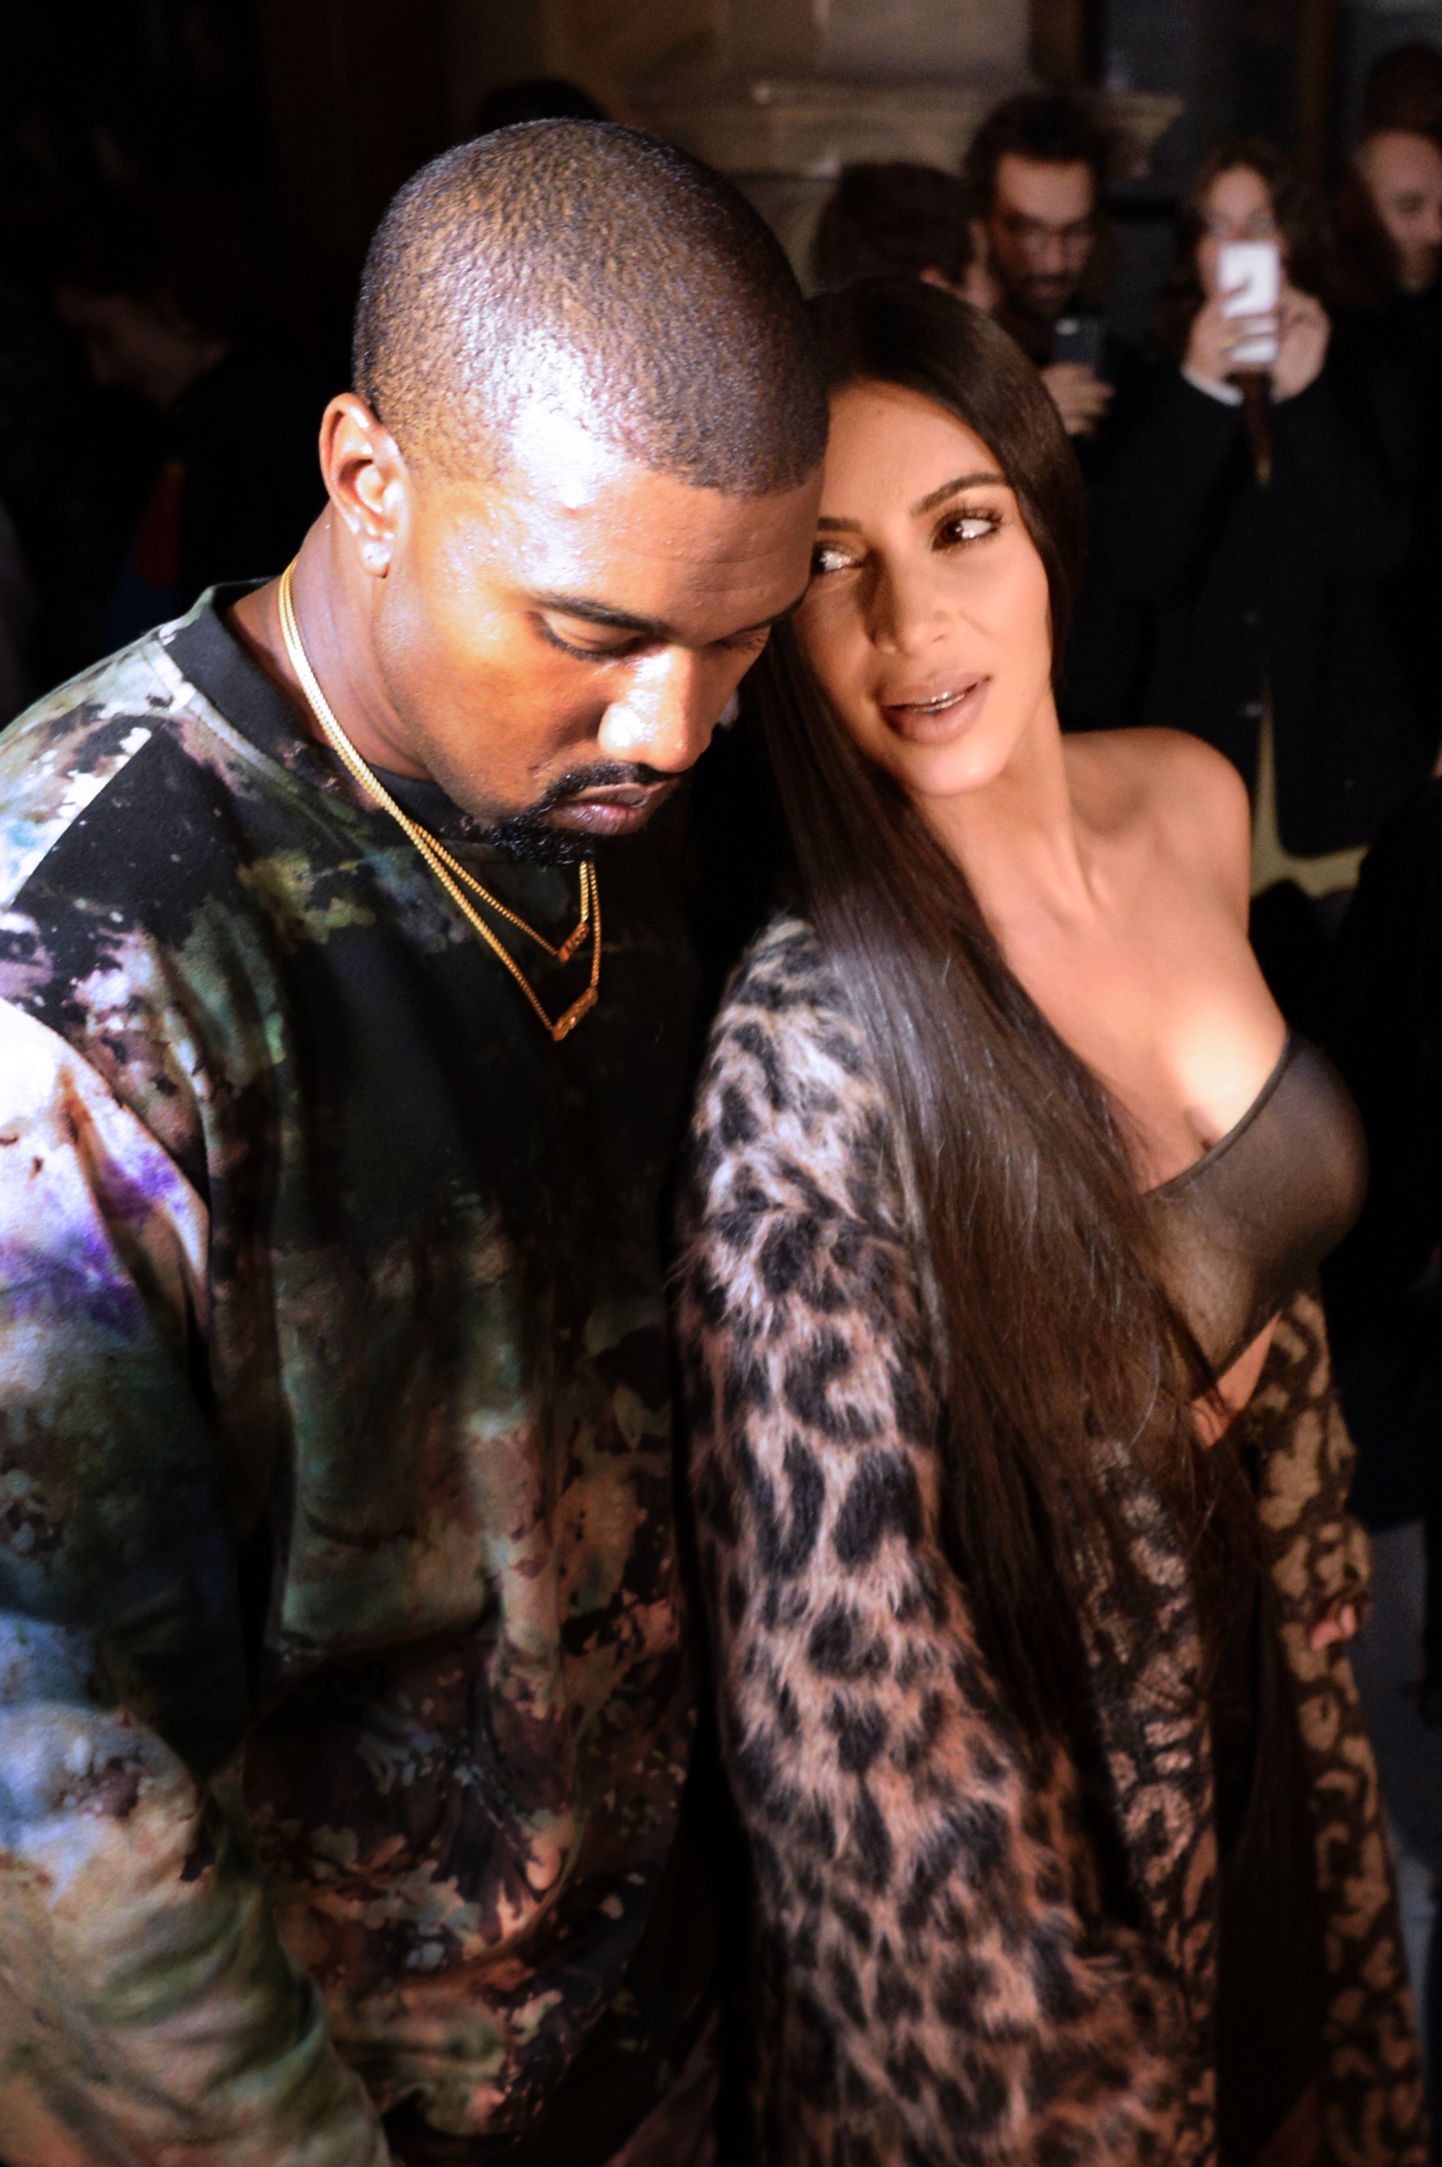 (From L) Kanye West and Kim Kardashian attend the Off-white 2017 Spring/Summer ready-to-wear collection fashion show, on September 29, 2016 in Paris. / AFP PHOTO / ALAIN JOCARD